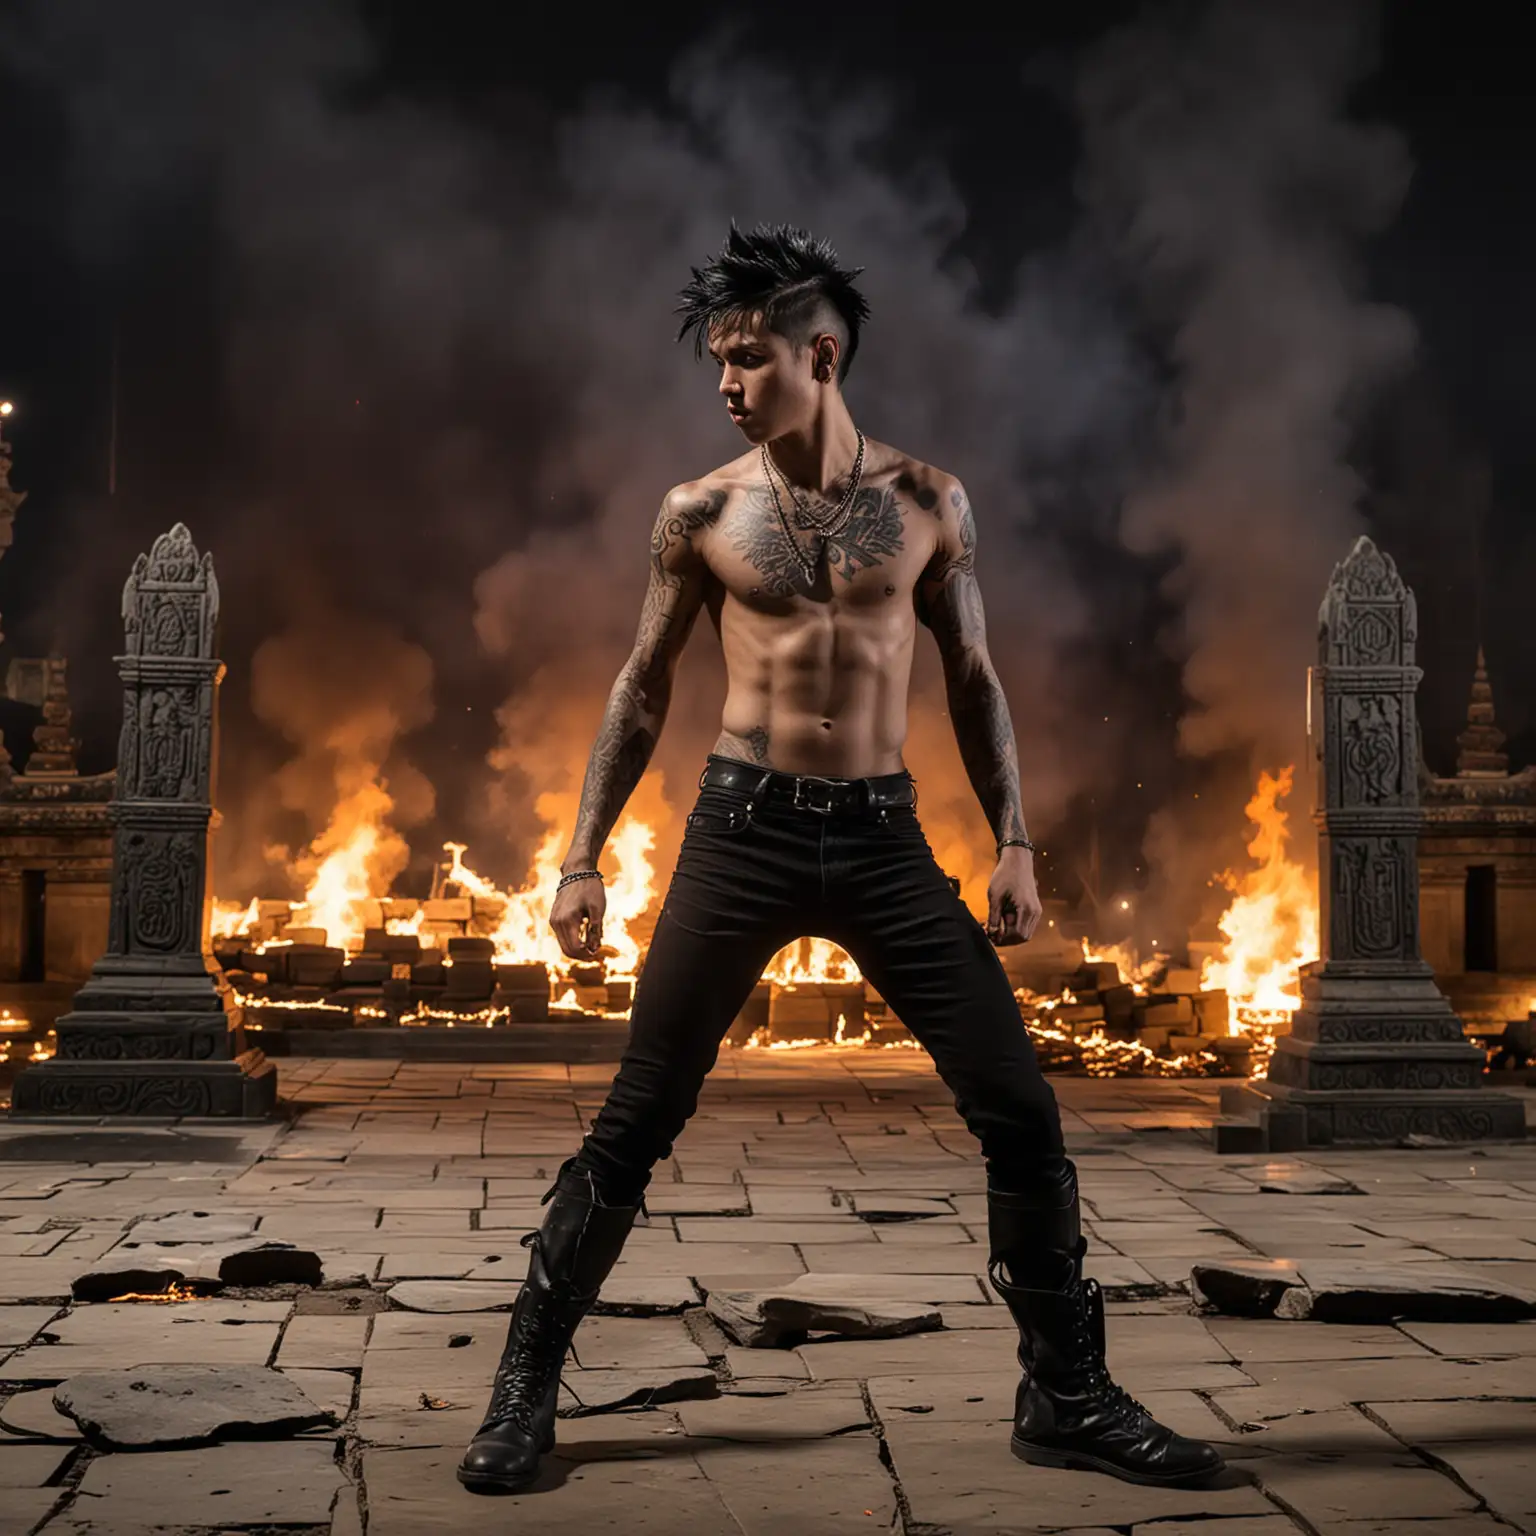 a bare-chested 16 year old boy with black mohawk hair, body full of tattoos, wearing black cloth and black boots fighting with fire in front of Indonesian stone temple at night